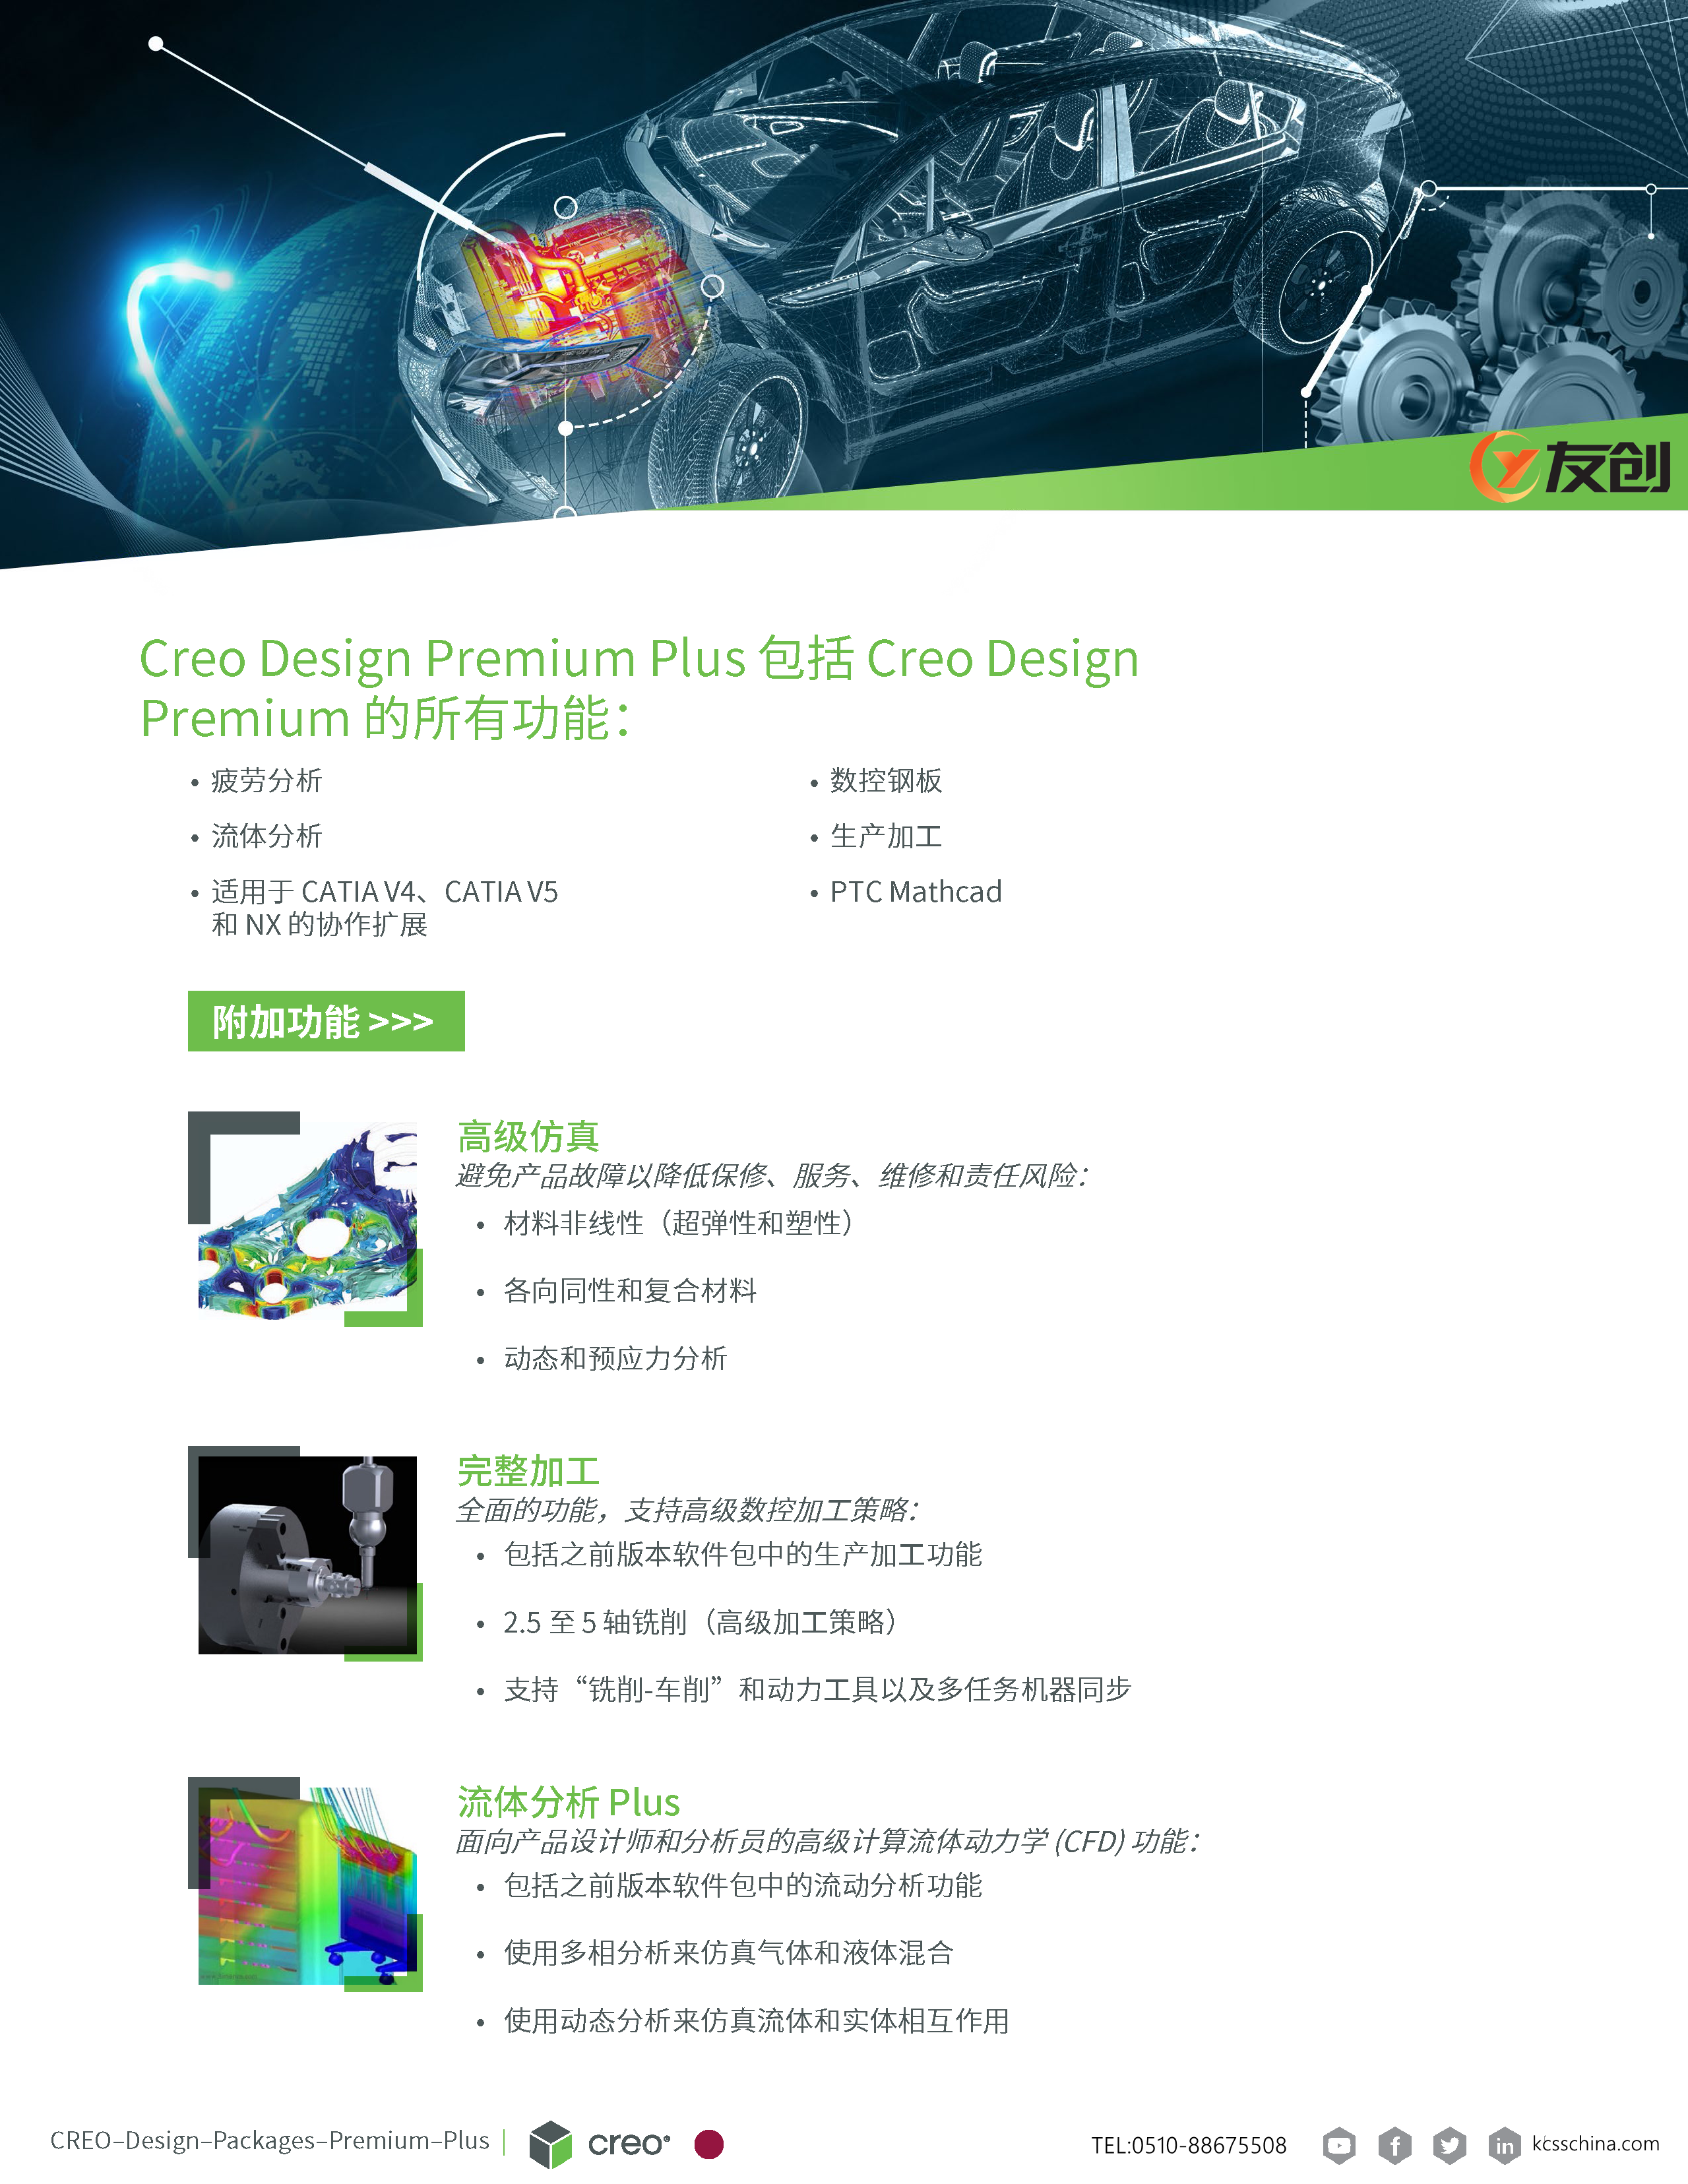 Creo Design Premium Plus Brochure (Simplified Chinese)_页面_3_副本.png